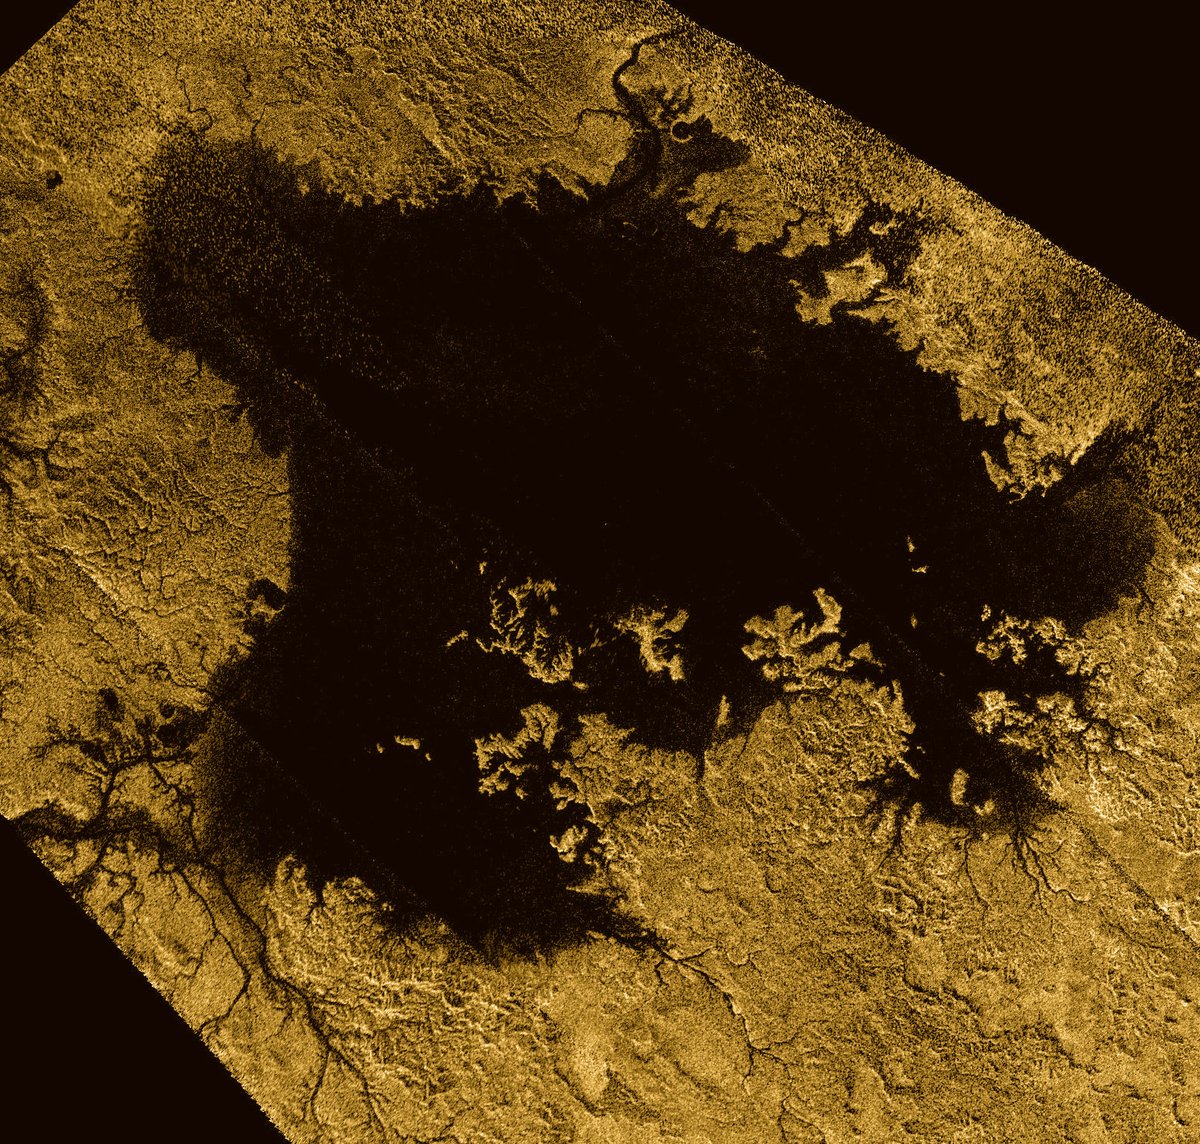 4/ The heat and pressure would likely keep some methane liquid at the surface, like the lakes of Titan.